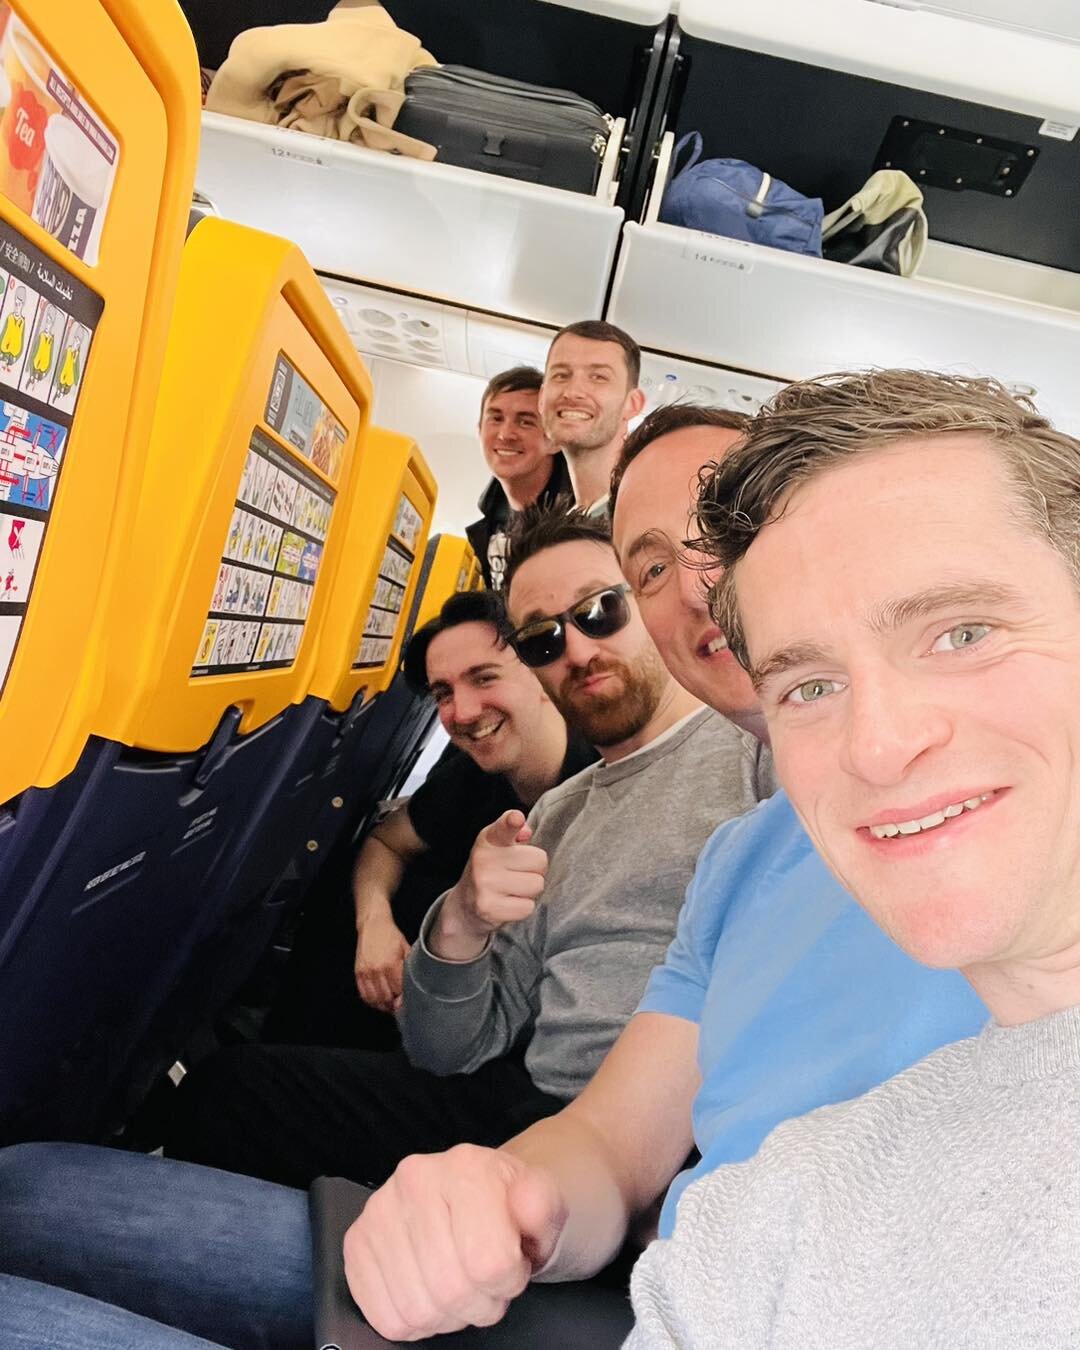 All boarded and ready for take off ✈️ Looking forward to tonight&rsquo;s festival in Copenhagen 🇩🇰 then we&rsquo;re off to Milan 🇮🇹 tomorrow 🎉 A special mention to our very own Kim Carnie for going out onto the wing to take this picture 🤪